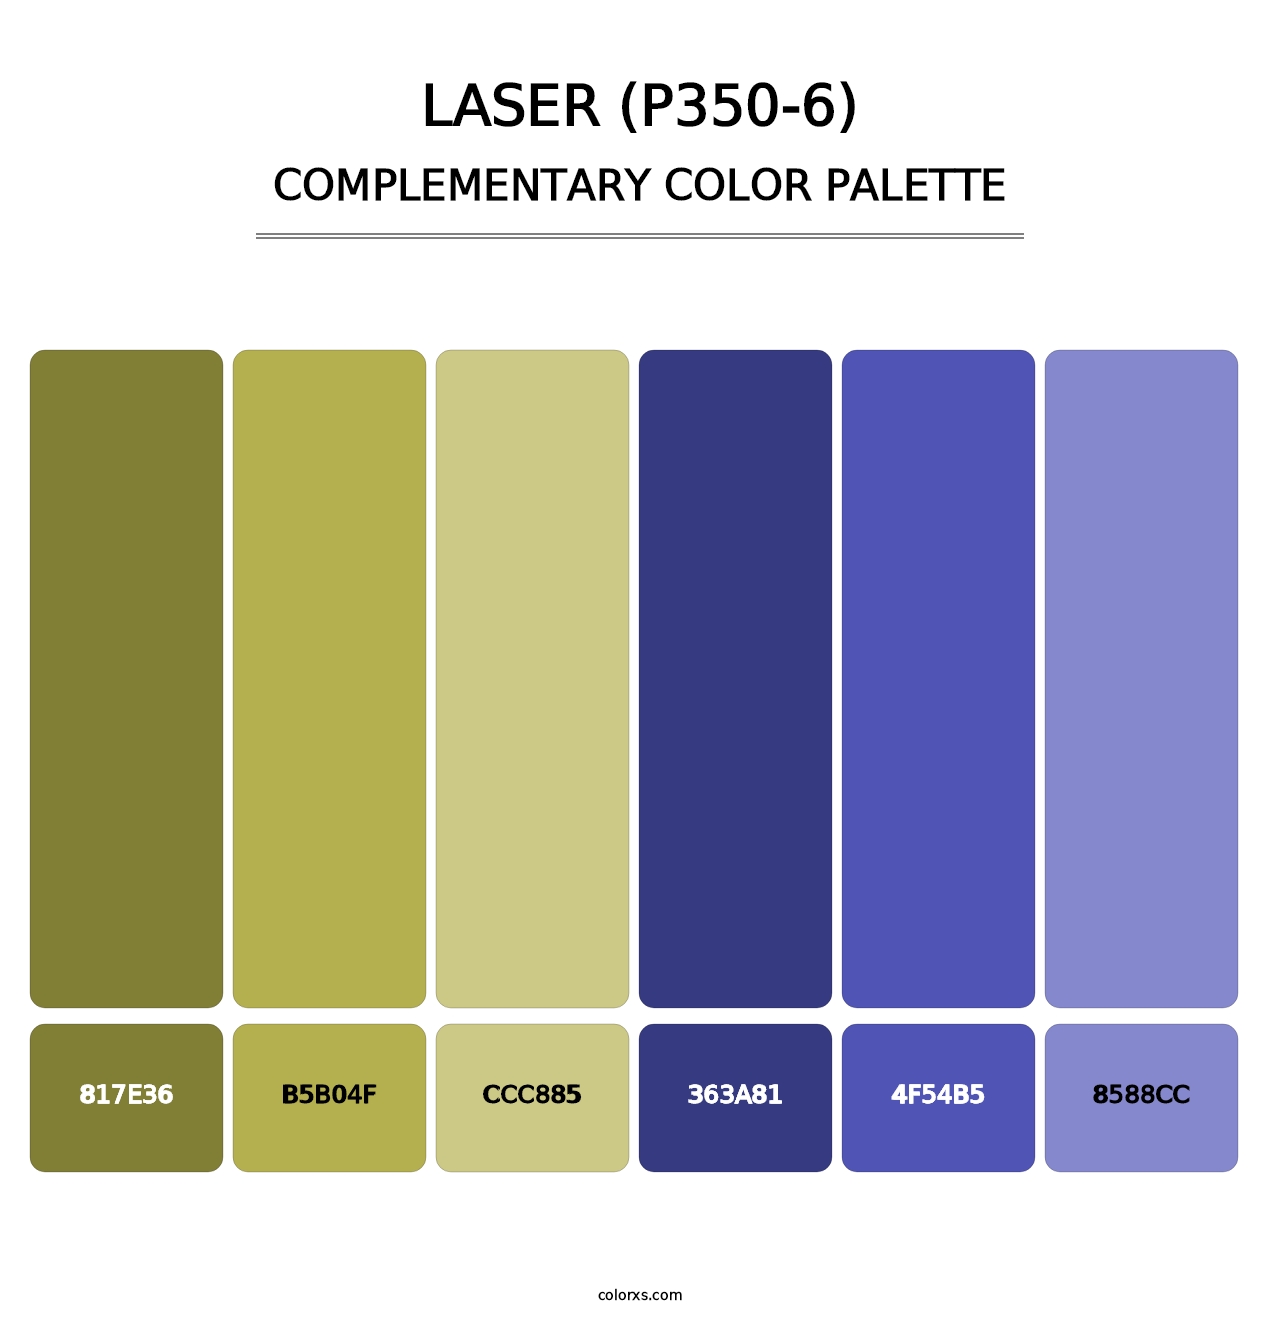 Laser (P350-6) - Complementary Color Palette